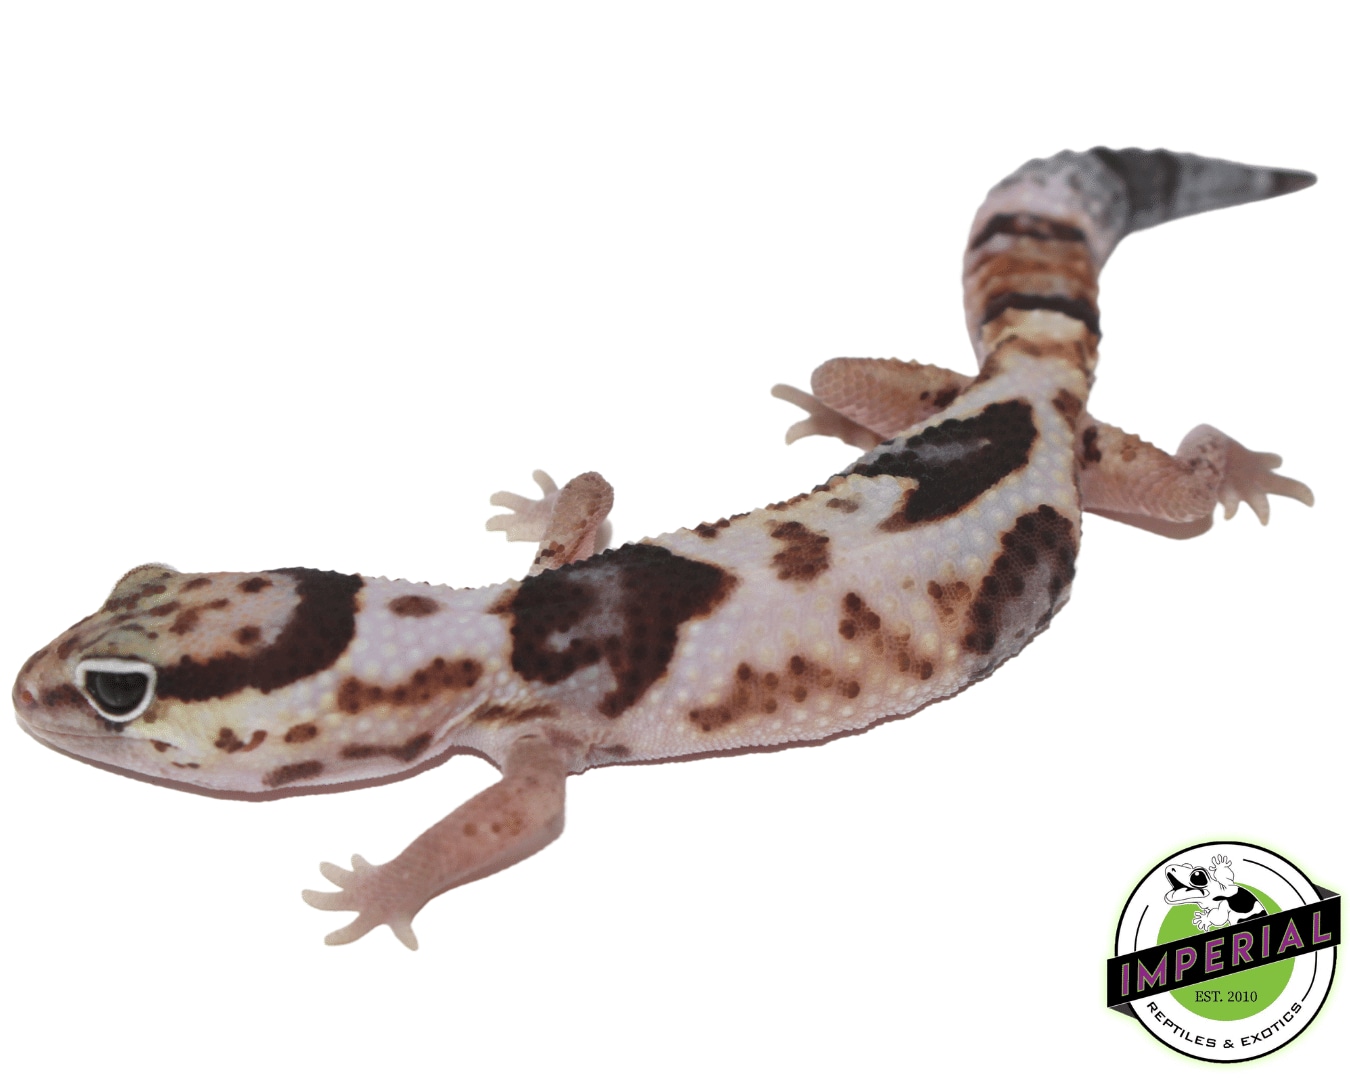 Whiteout African African Fat-Tailed Gecko by Imperial Reptiles & Exotics, LLC